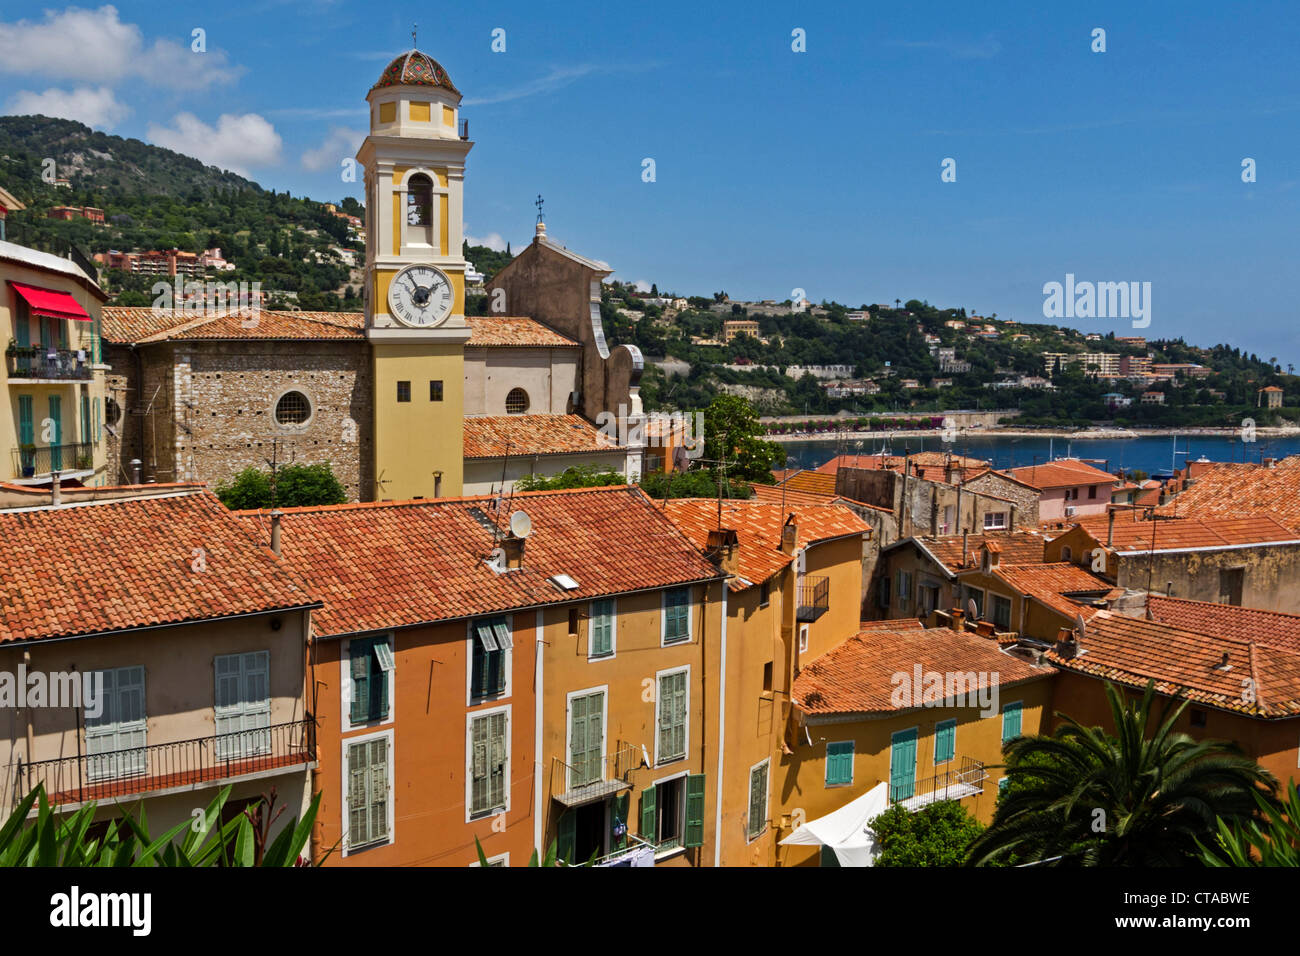 View of the old town of Villefranche sur mer, Cote d'Azur, Provence, France, Europe Stock Photo